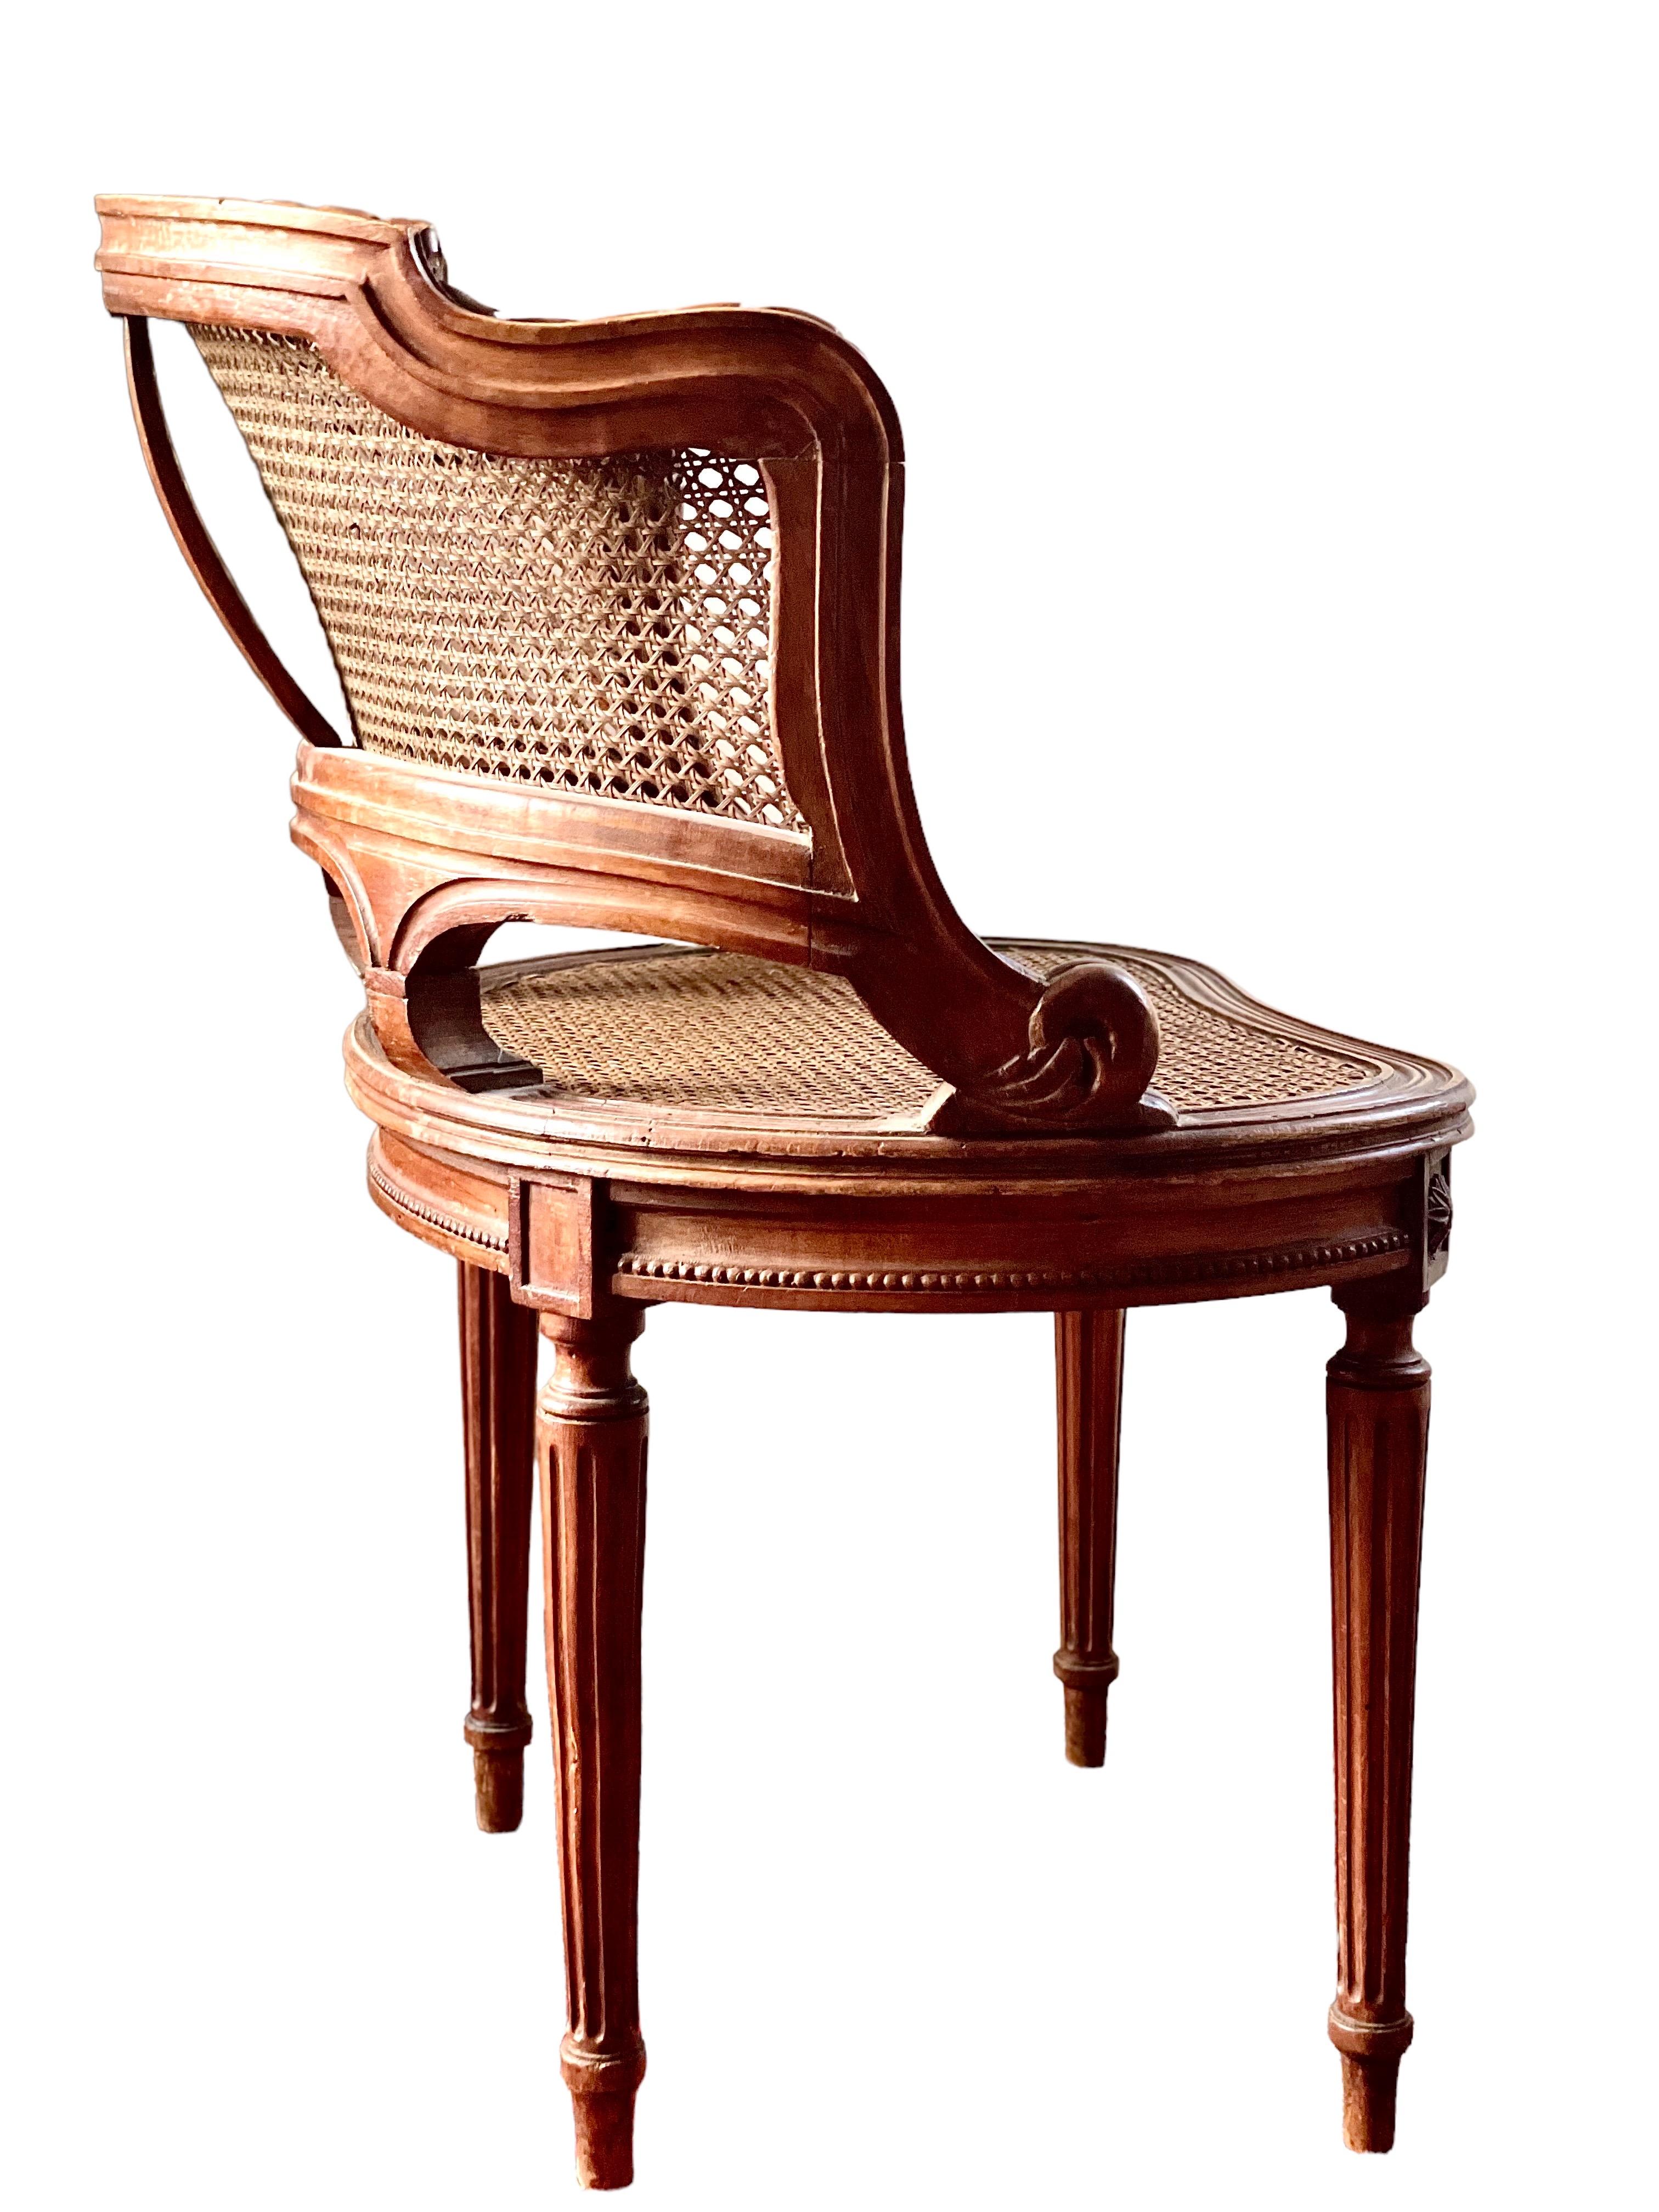 An interesting Louis XVI style desk chair in moulded and sculpted beech, with caned seat and back, dating from the beginning of the 19th century. Of particular note are the gondola backrest and kidney-shaped seat, which offer a high degree of